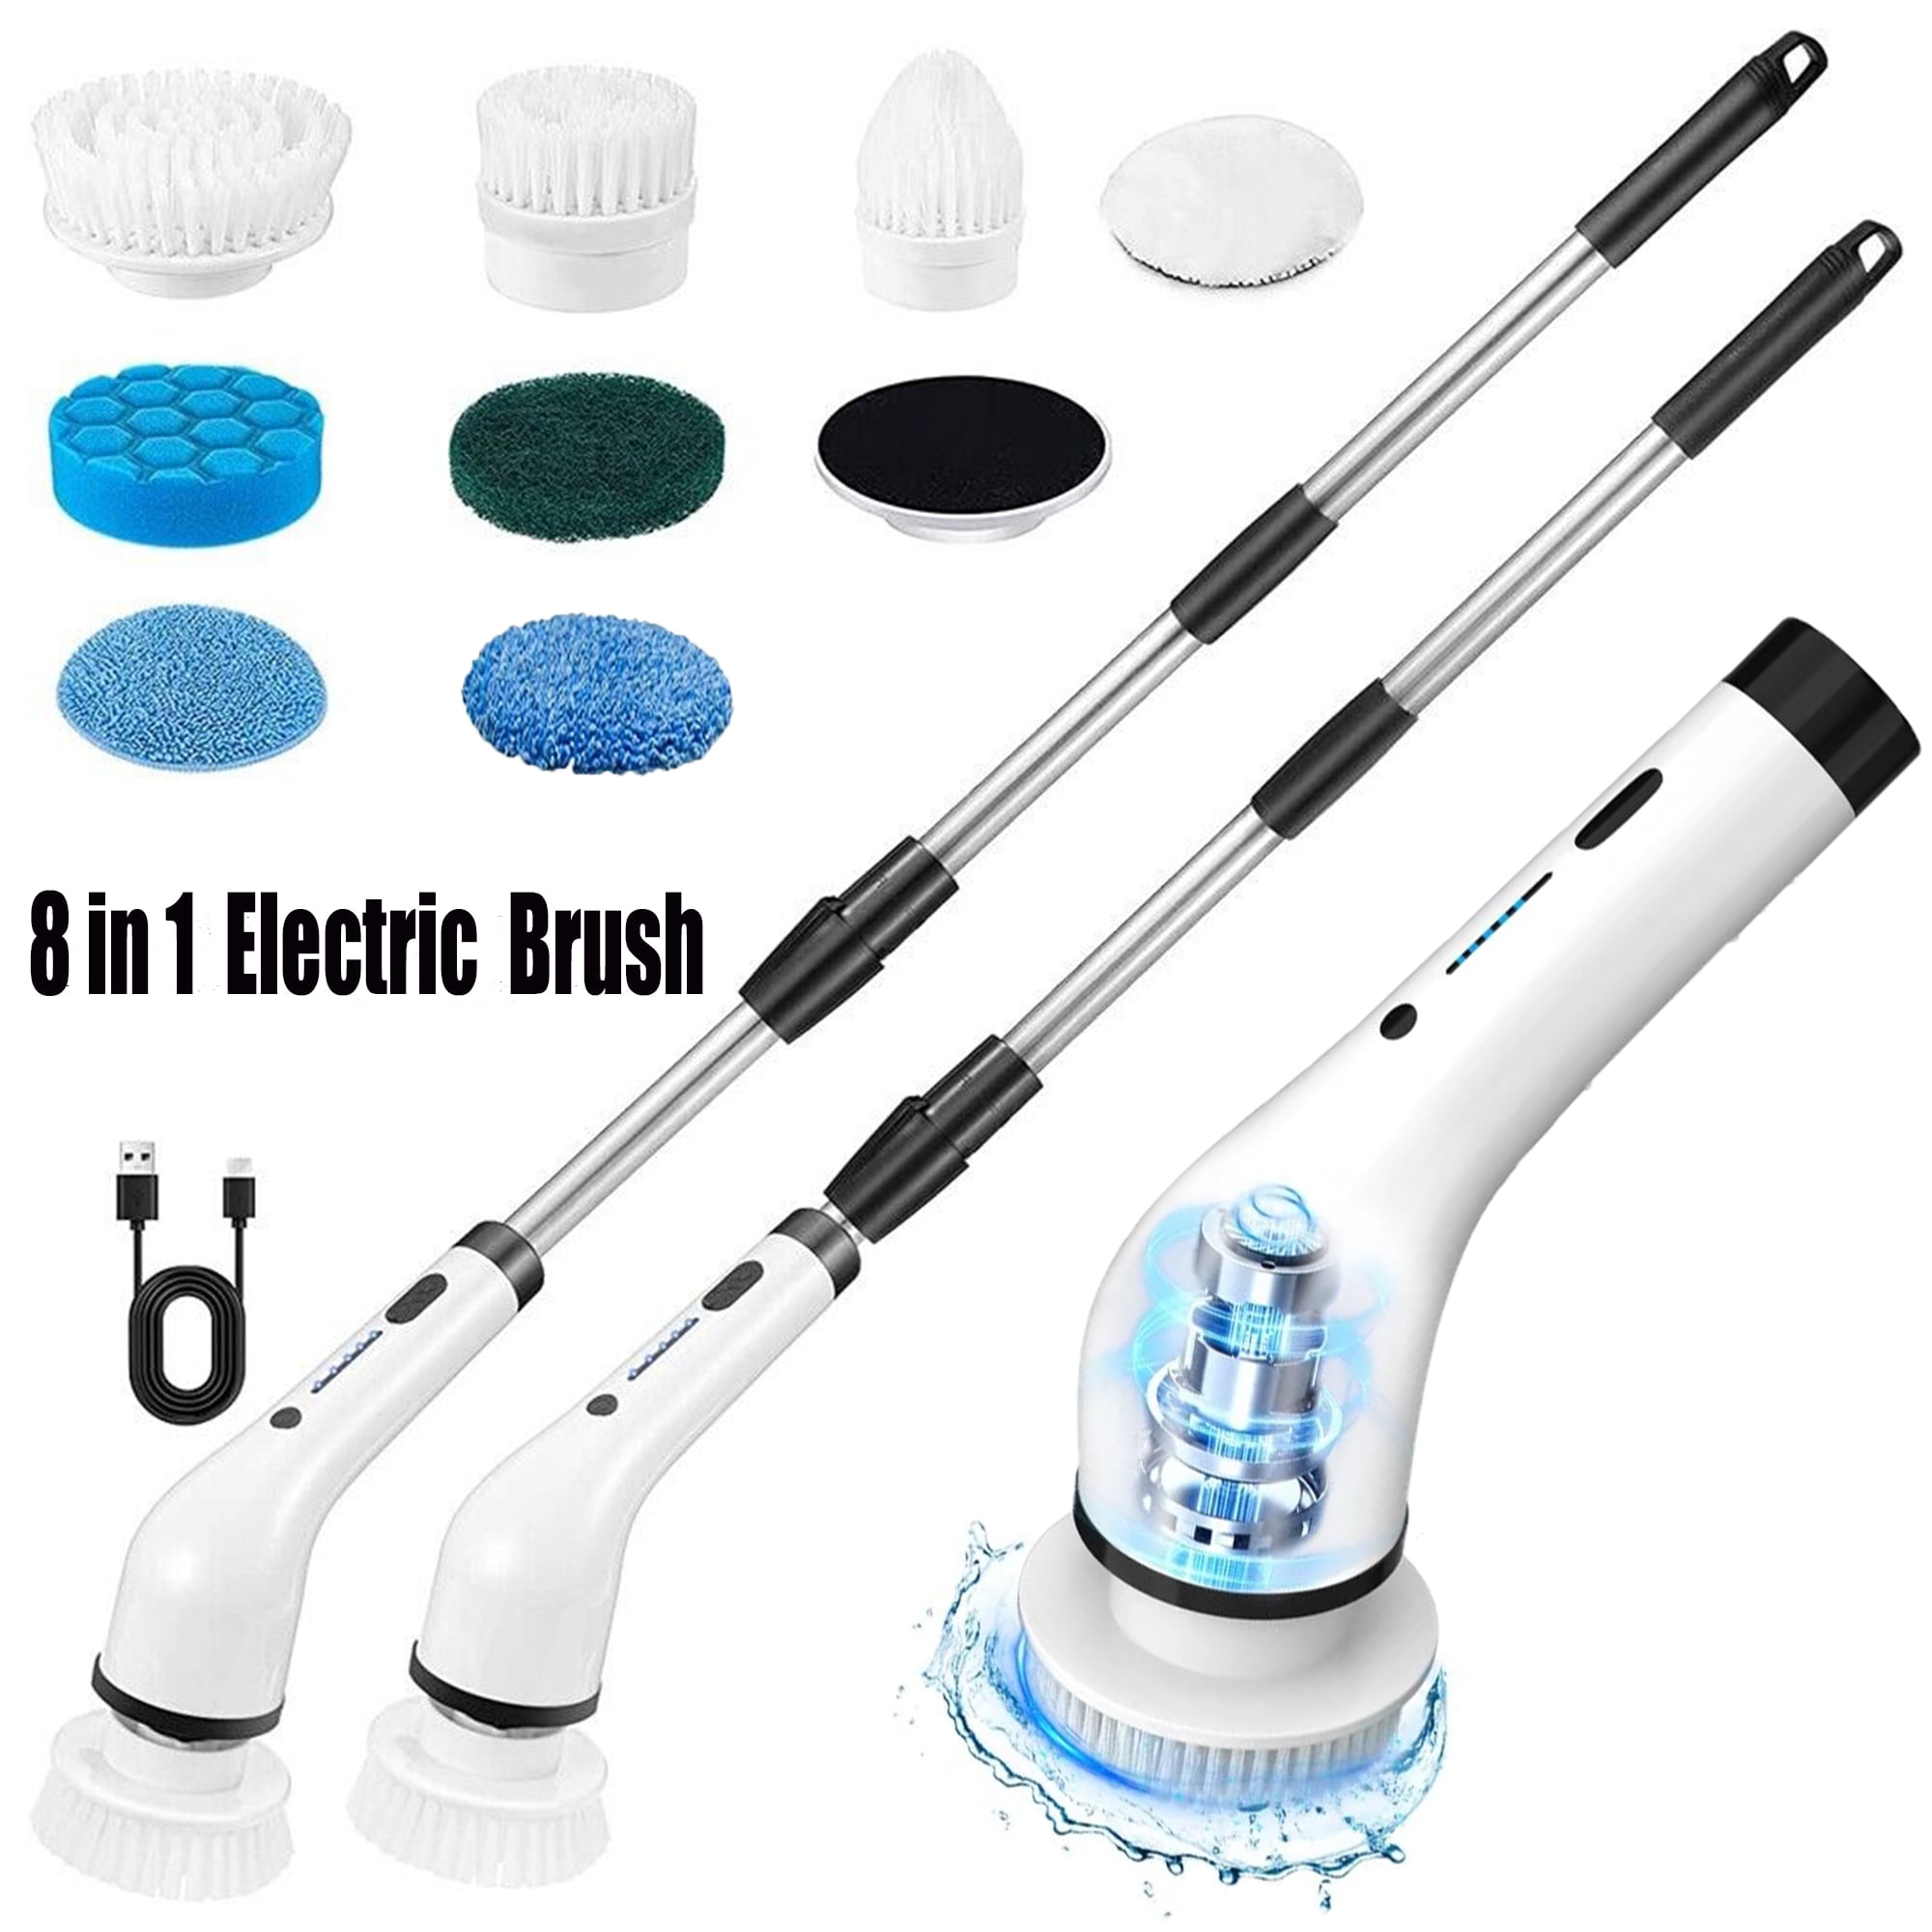 iDOO Cordless Electric Cleaning Brush, Battery Power Scrubber IPX7  Waterproof, Electric Grout Brush with 6 Brushes for Grout, Tile Crevice,  Corner